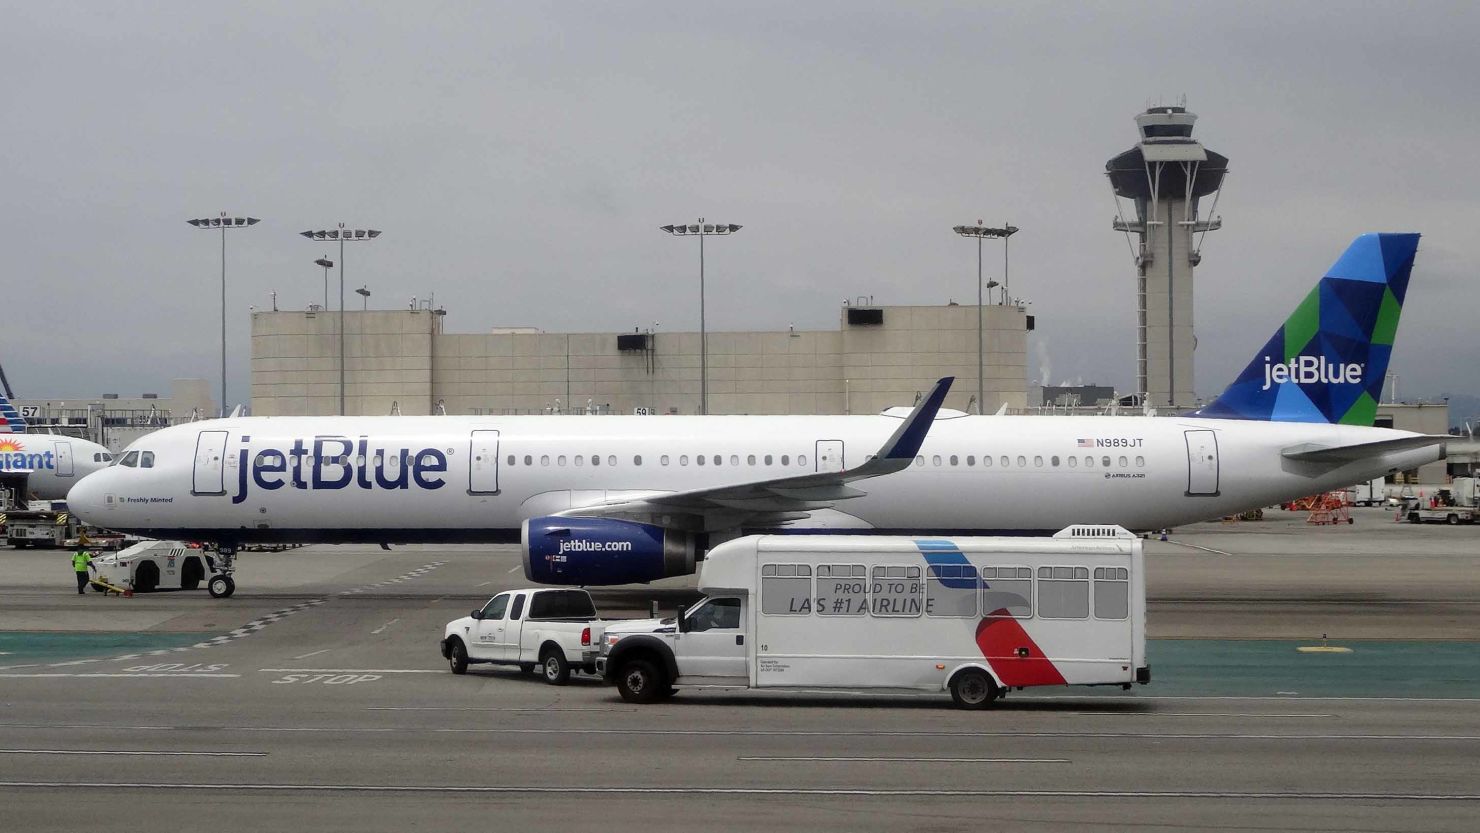 JetBlue uses reservation technology provided by Sabre, which was experiencing an outage early Tuesday.